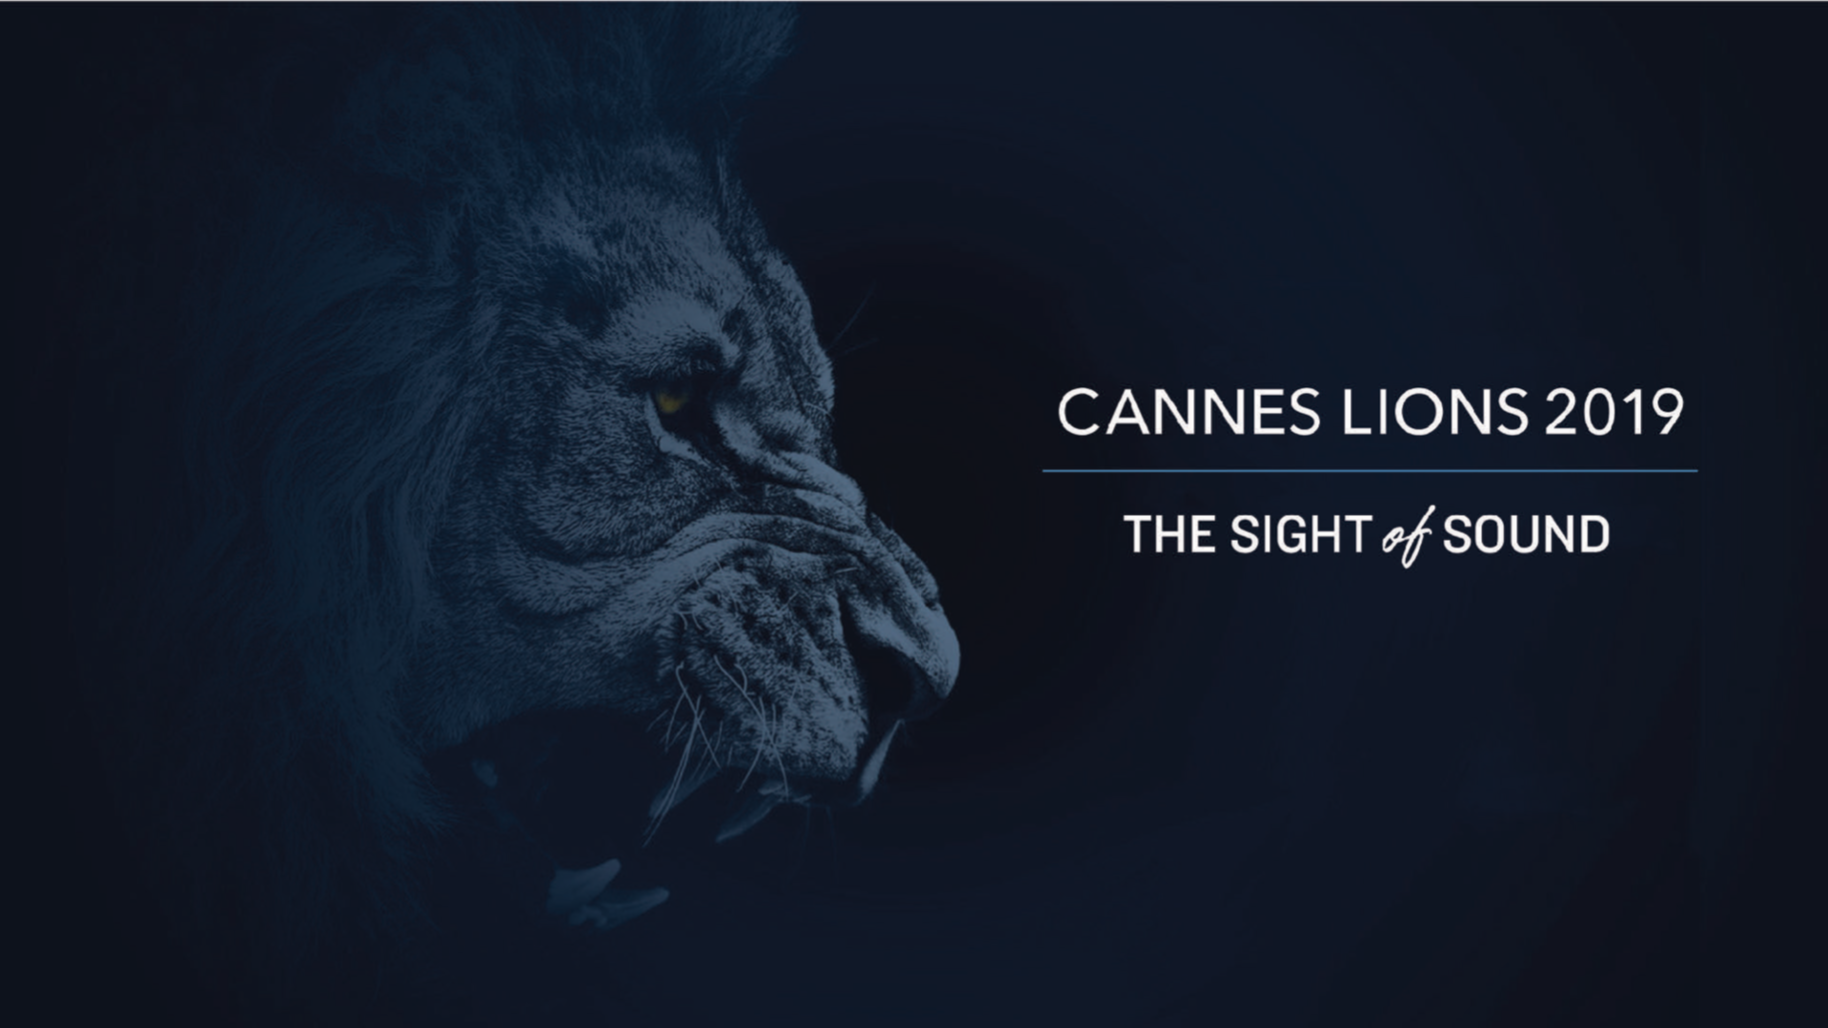 (Cannes Lions) The Sight of Sound 